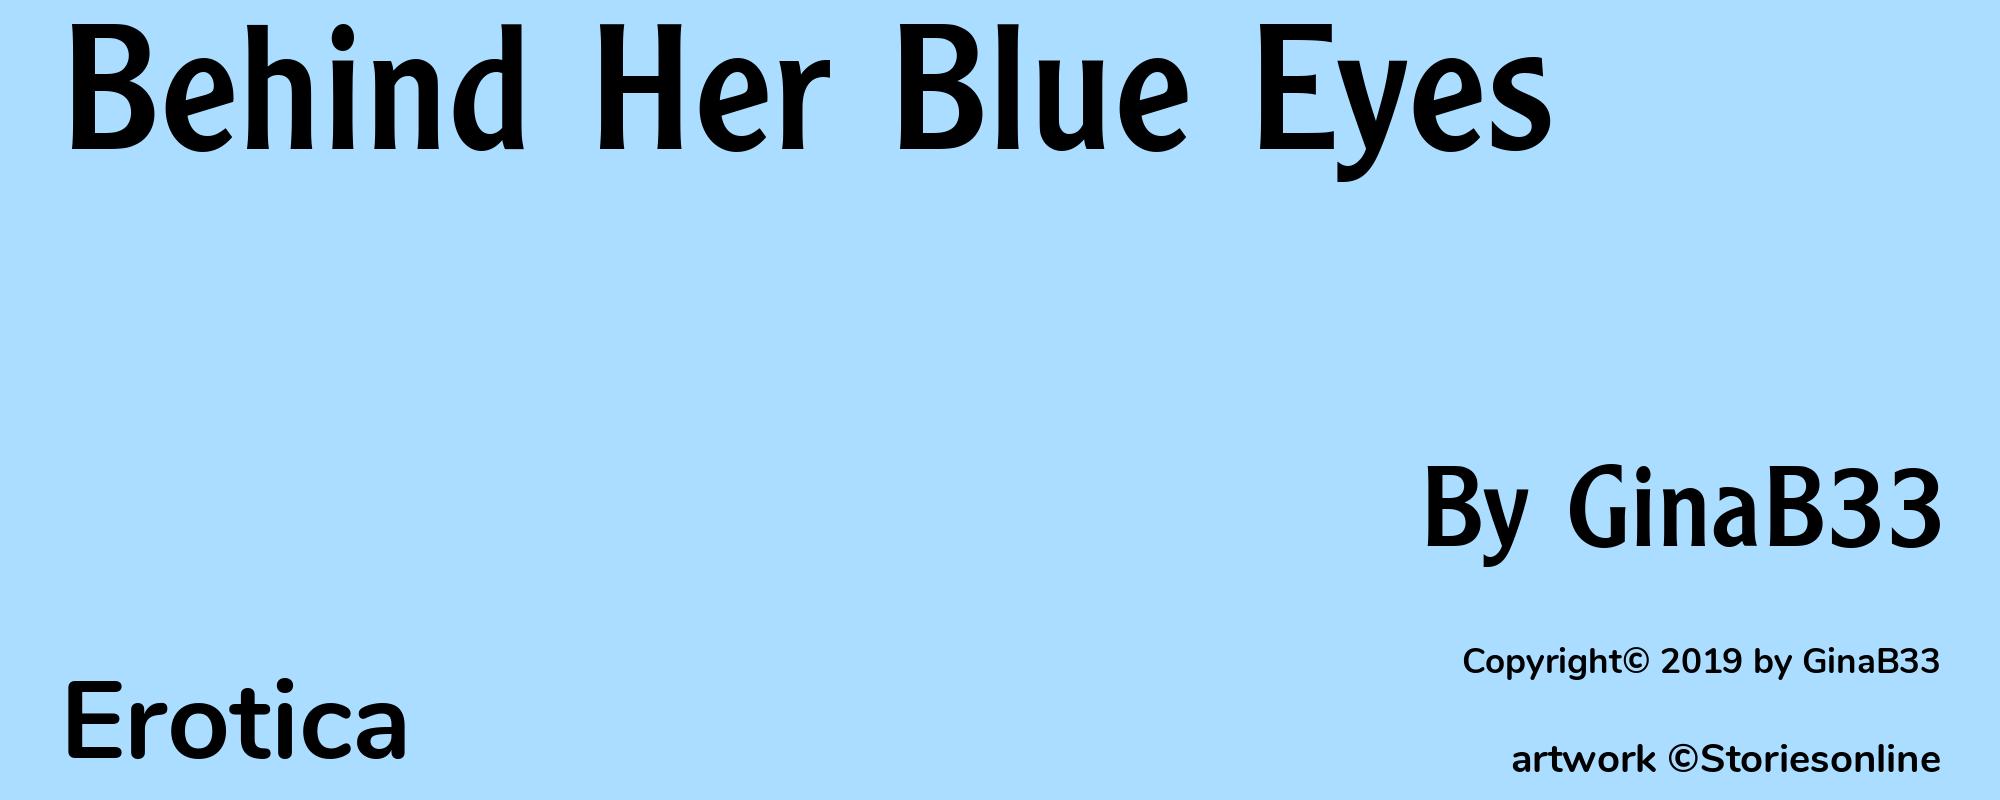 Behind Her Blue Eyes - Cover